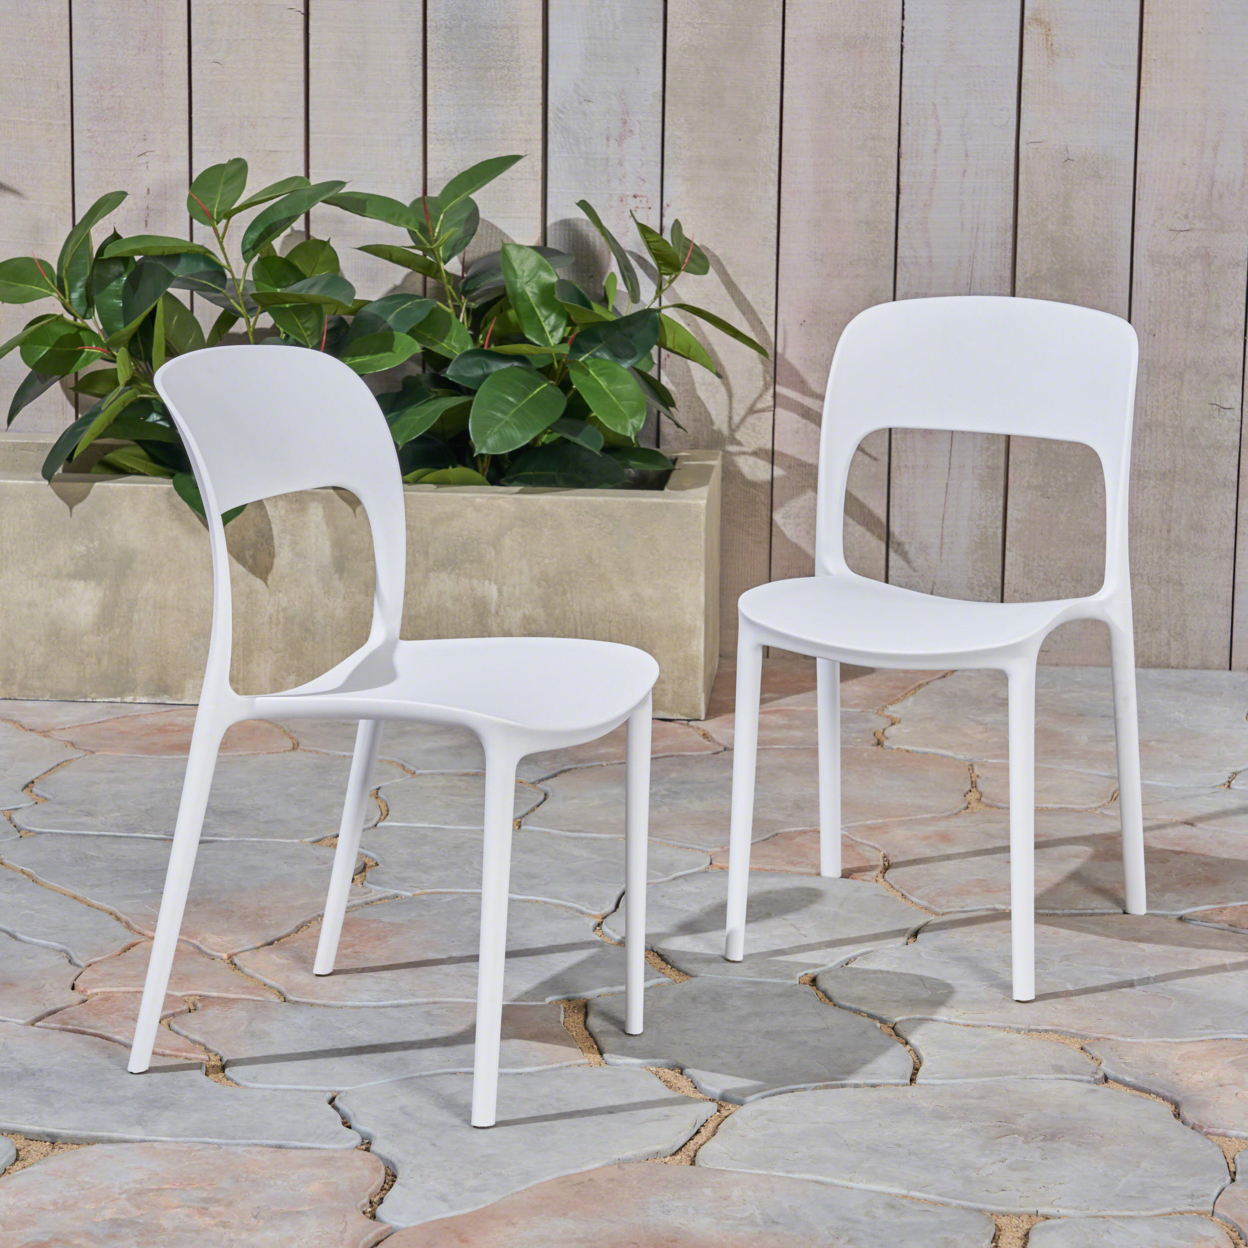 Dean Outdoor Plastic Chairs (Set Of 2) - White, Set Of 2